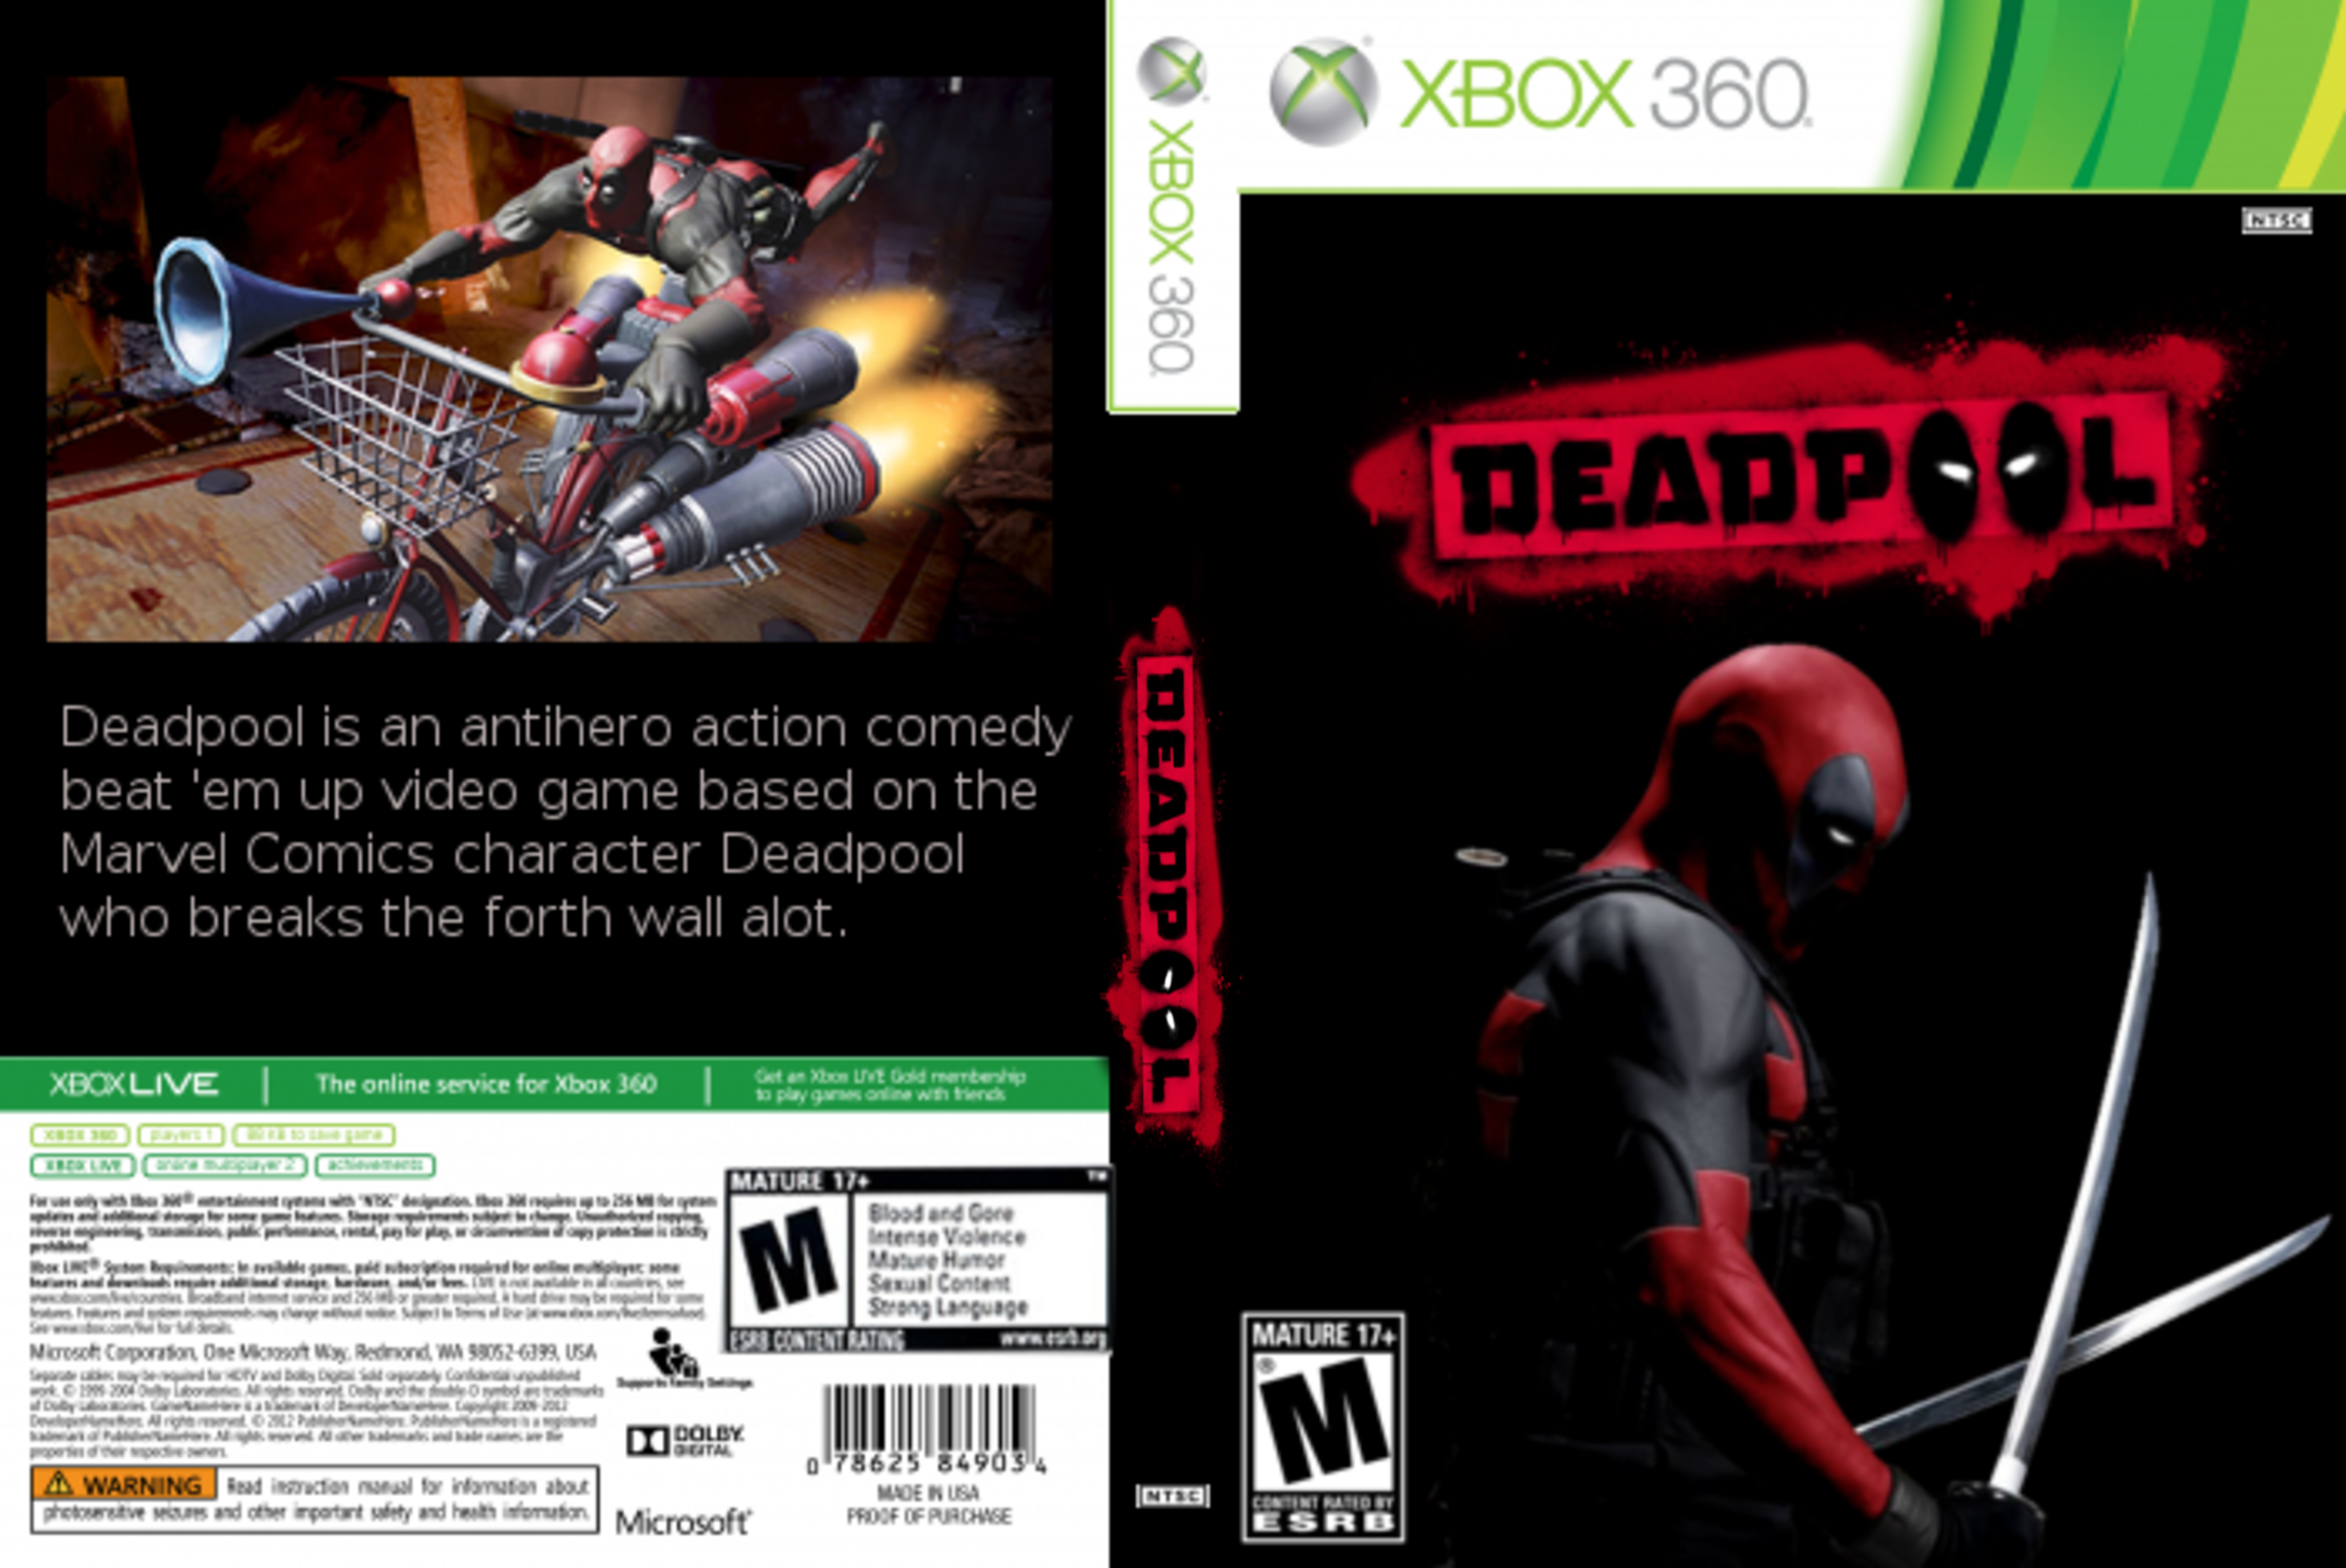 Deadpool - The Game box cover